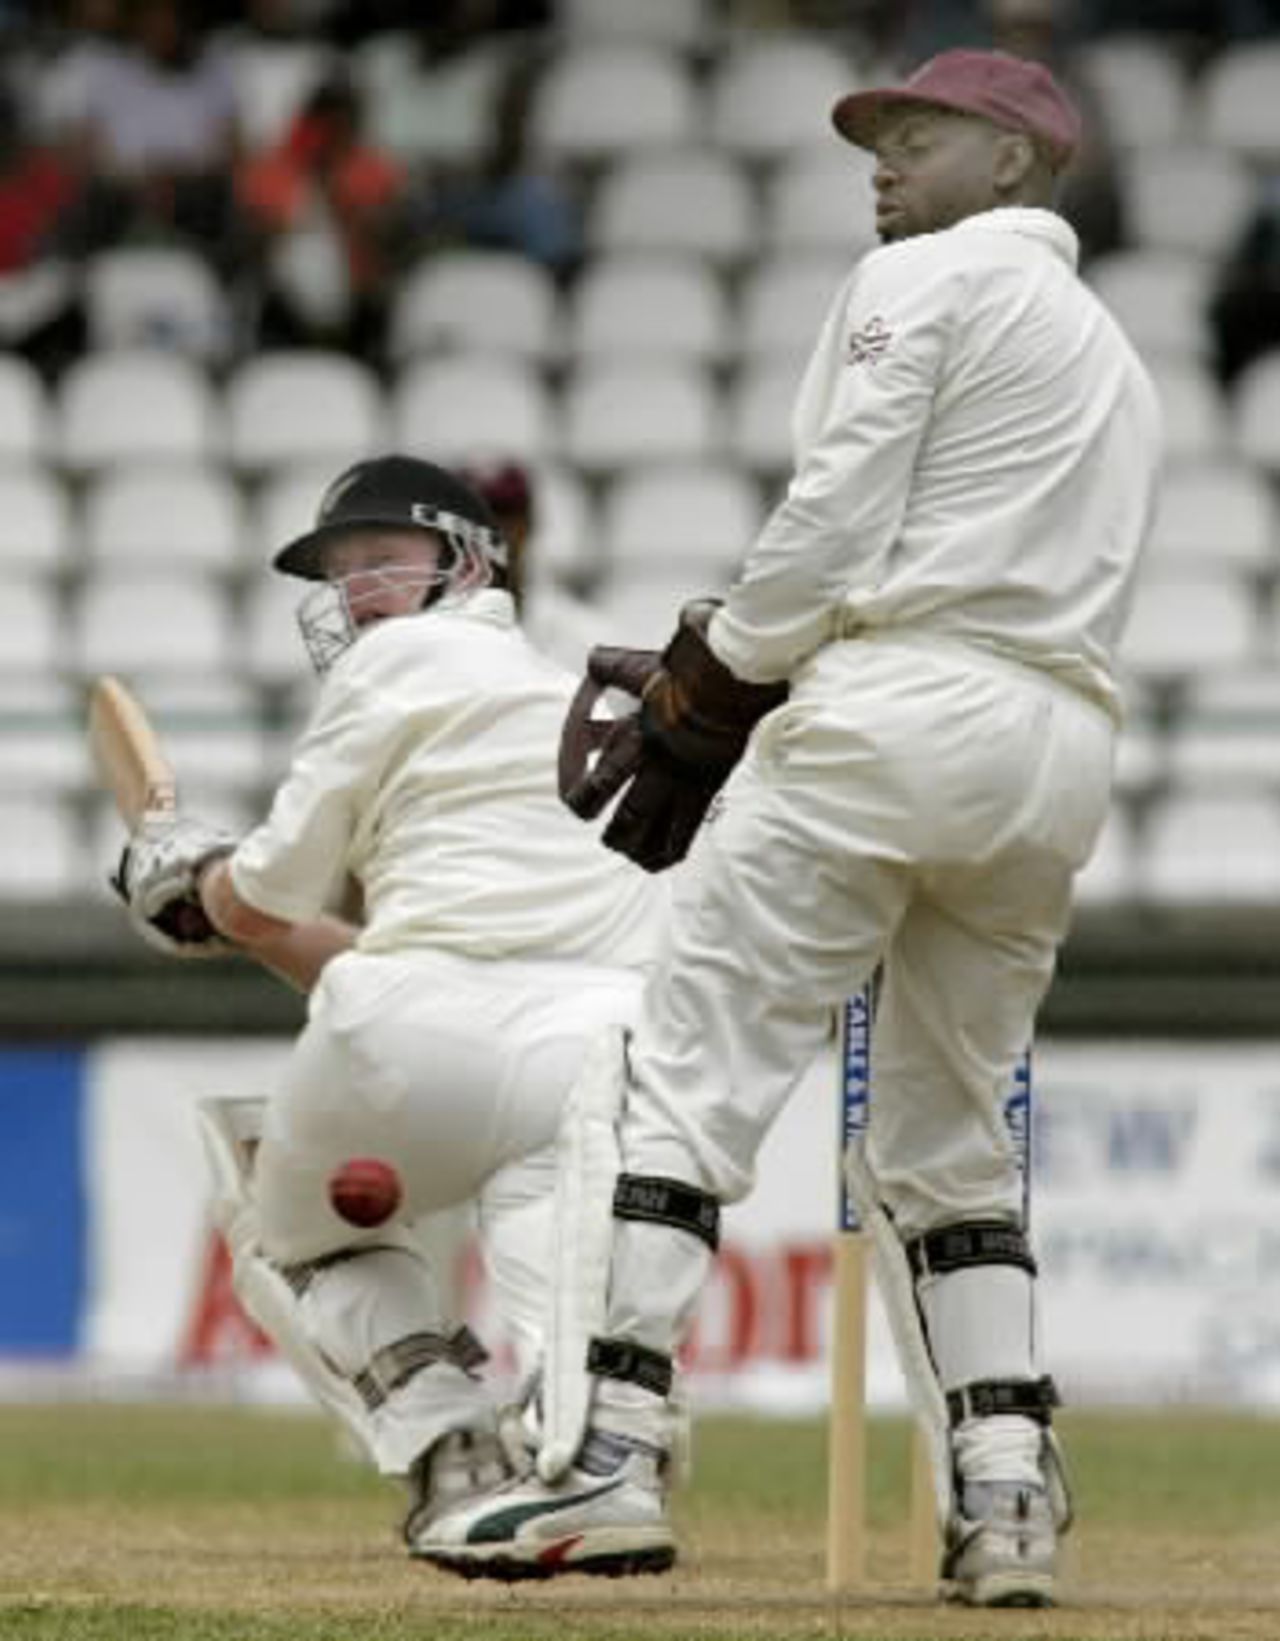 New Zealand batsman Scott Styris sweeps a delivery from West Indies bowler Mahendra Nagamootoo to the boundary during his first innings of 107 as wicket-keeper Ridley Jacobs looks on. 2nd Test: West Indies v New Zealand at Queen's Park, St George's, Grenada, 28 June-2 July 2002 (29 June 2002).